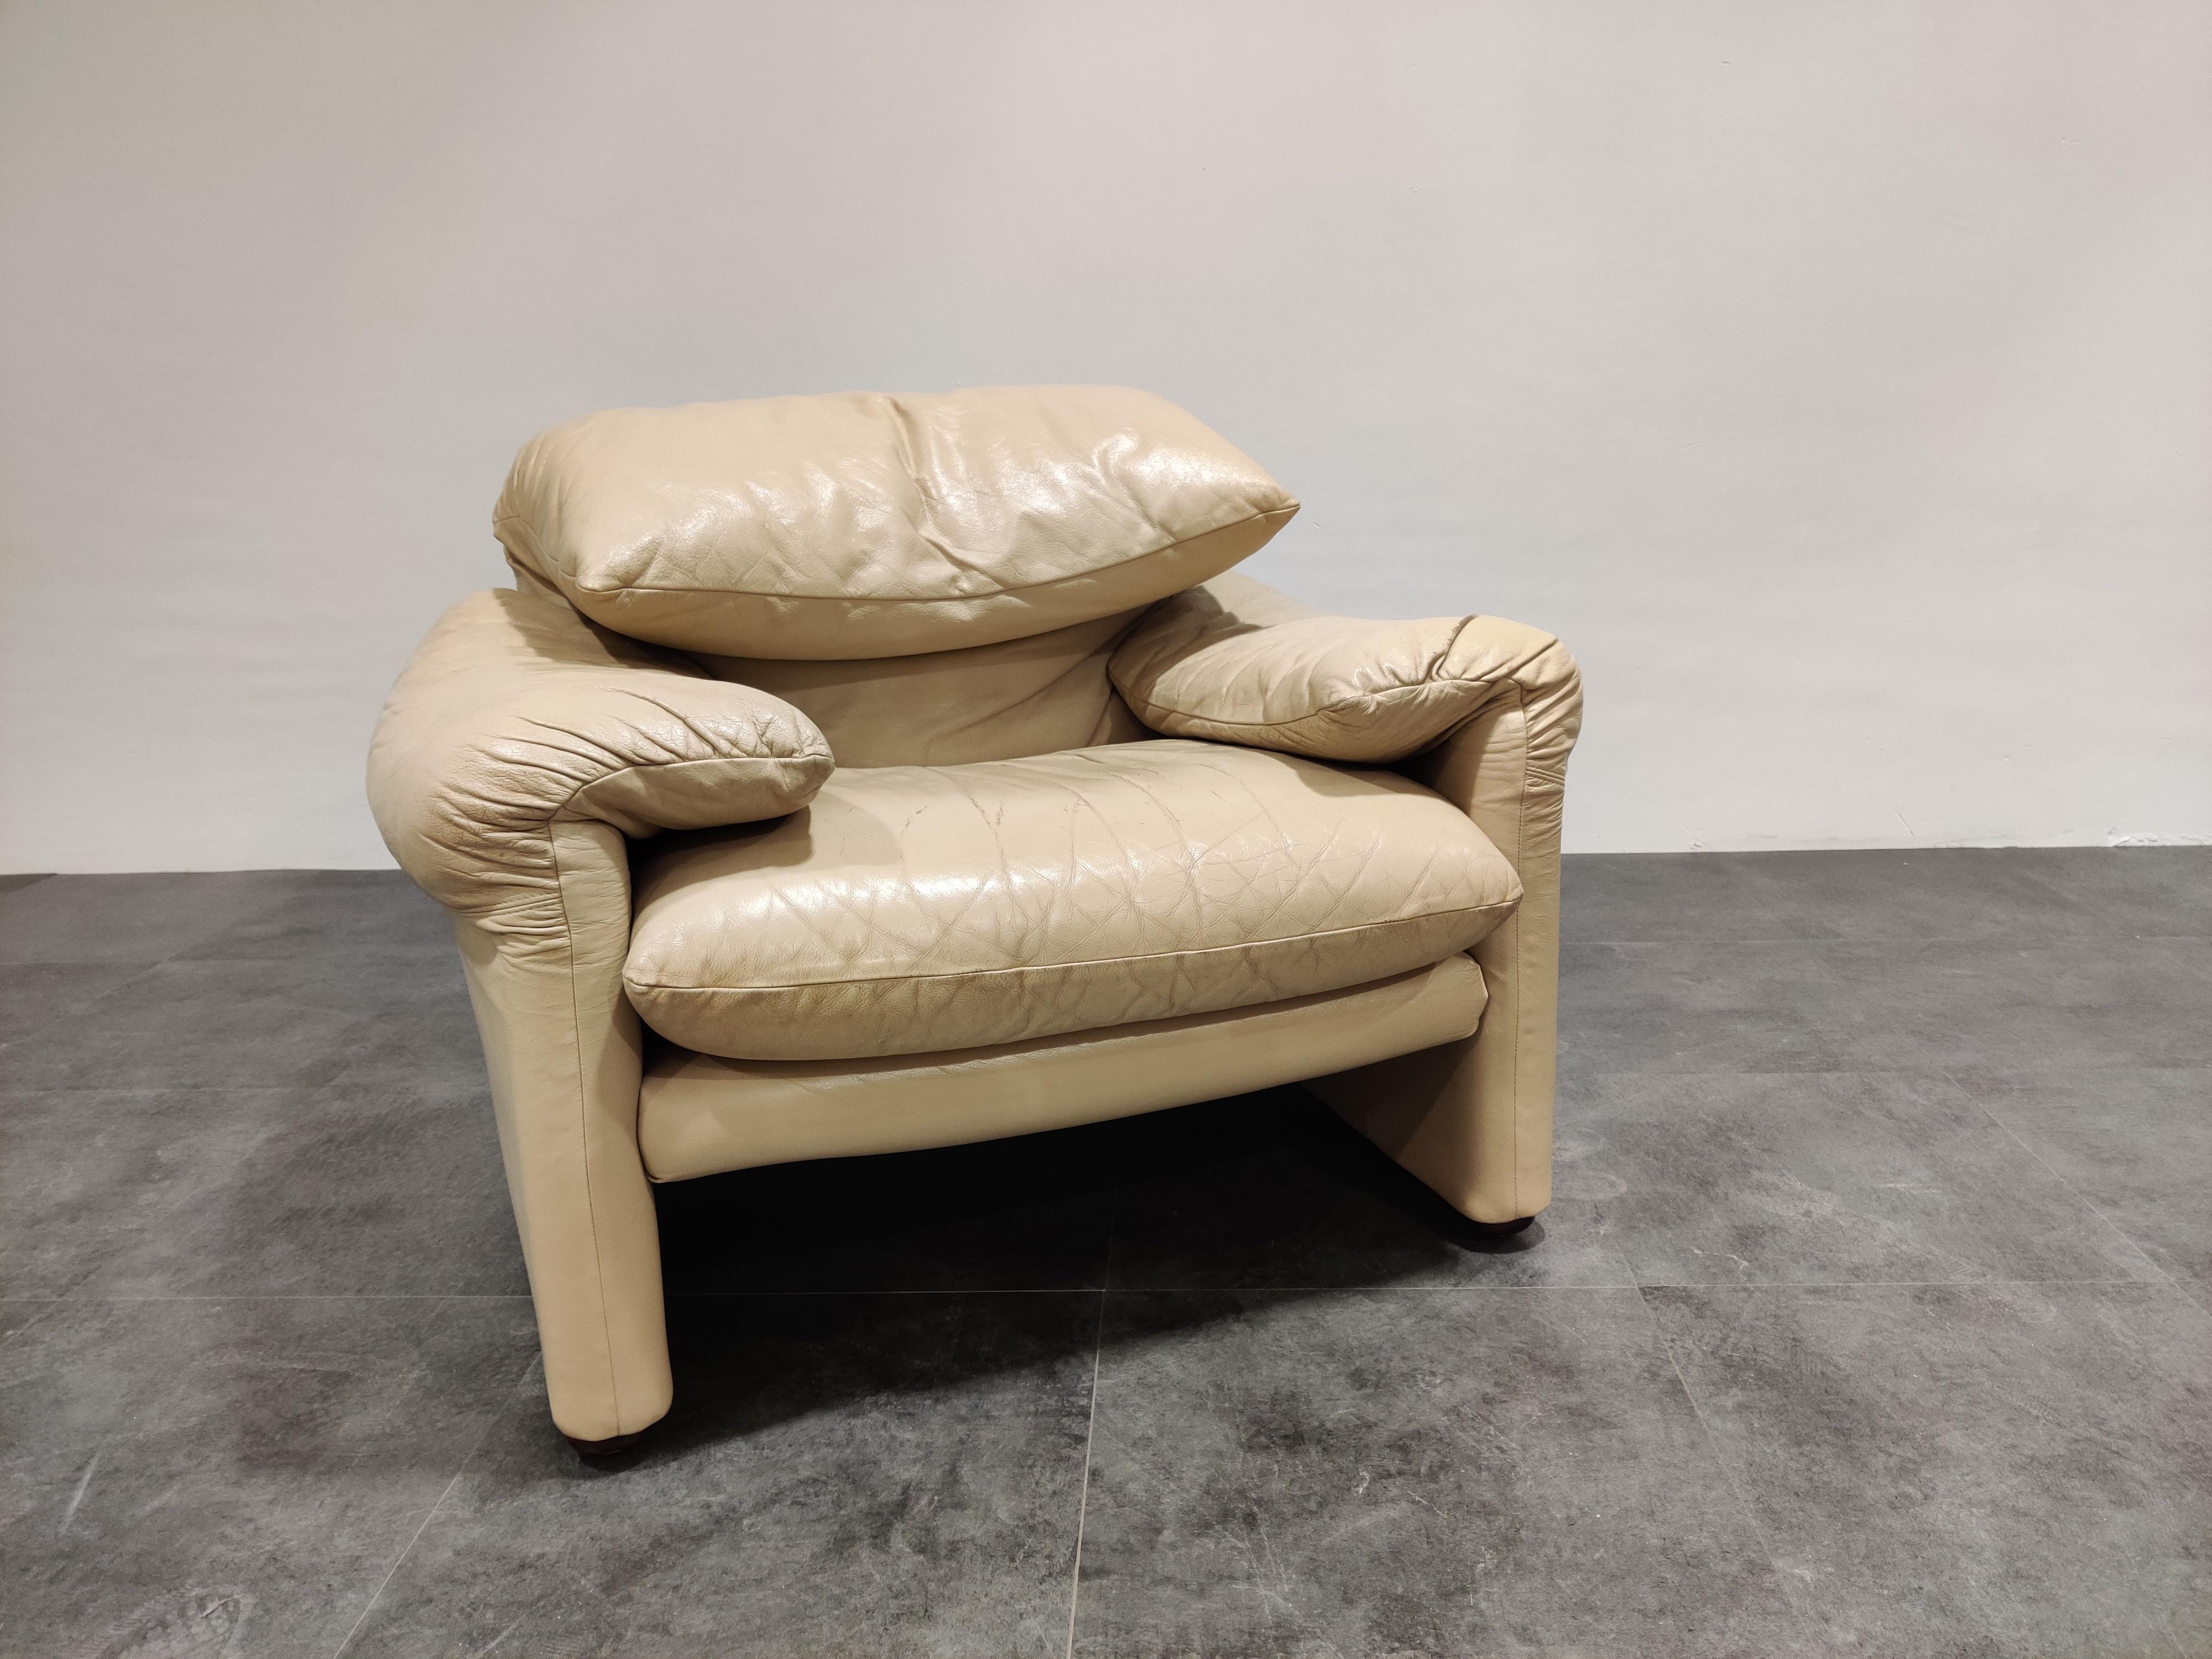 Vintage cream leather maralunga armchair designed by Vico Magistretti for Cassina.

Award winning design piece from 1973 with adjustable backrest.

Condition:
The leather upholstery is a little worn, in a beautiful way but still perfectly